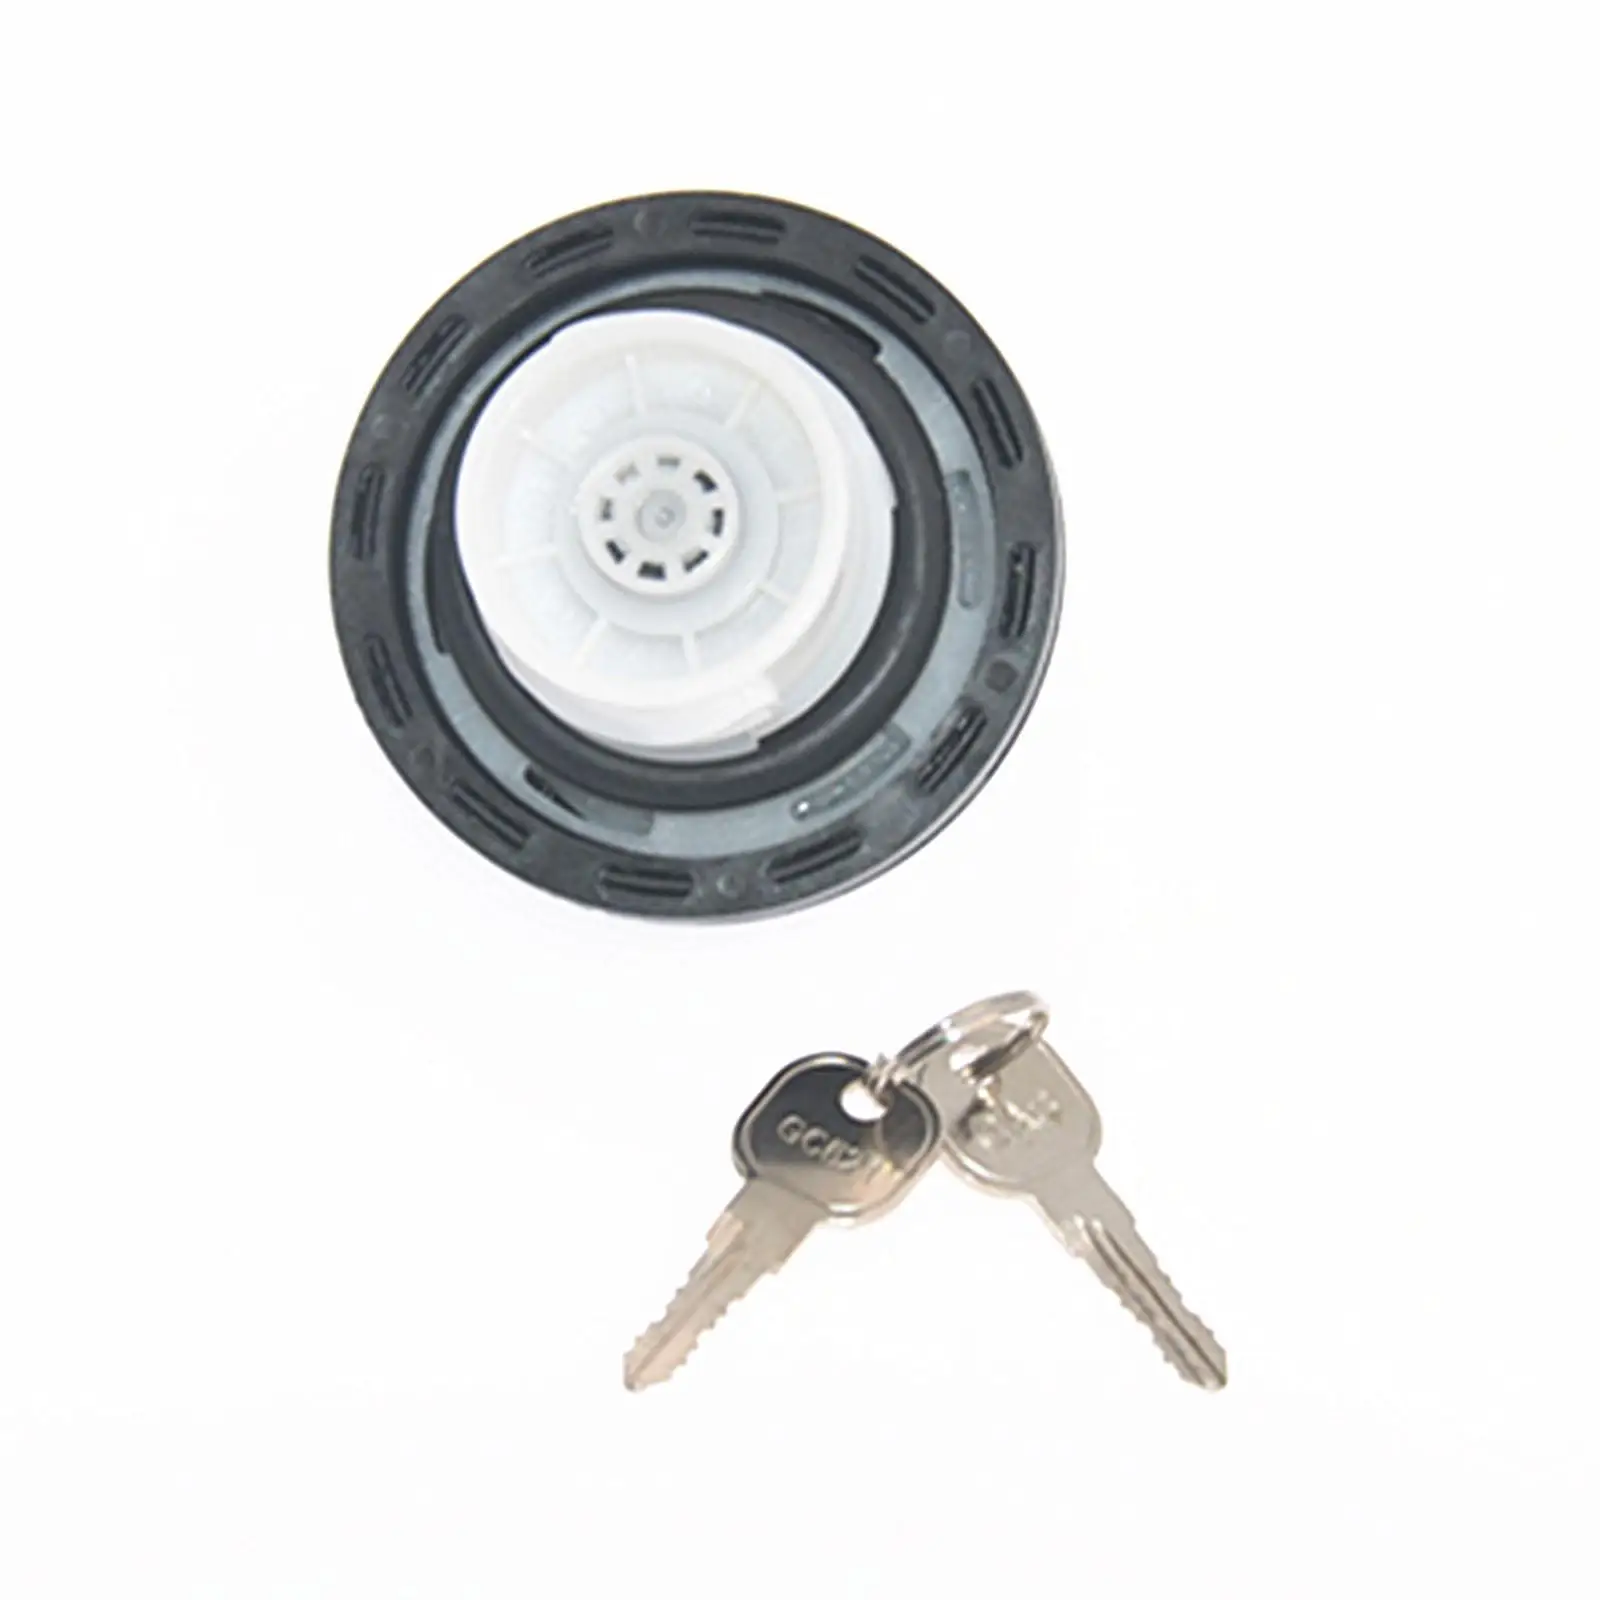 Locking Gas Fuel Cap Replacement Accessories Easy to Install Durable